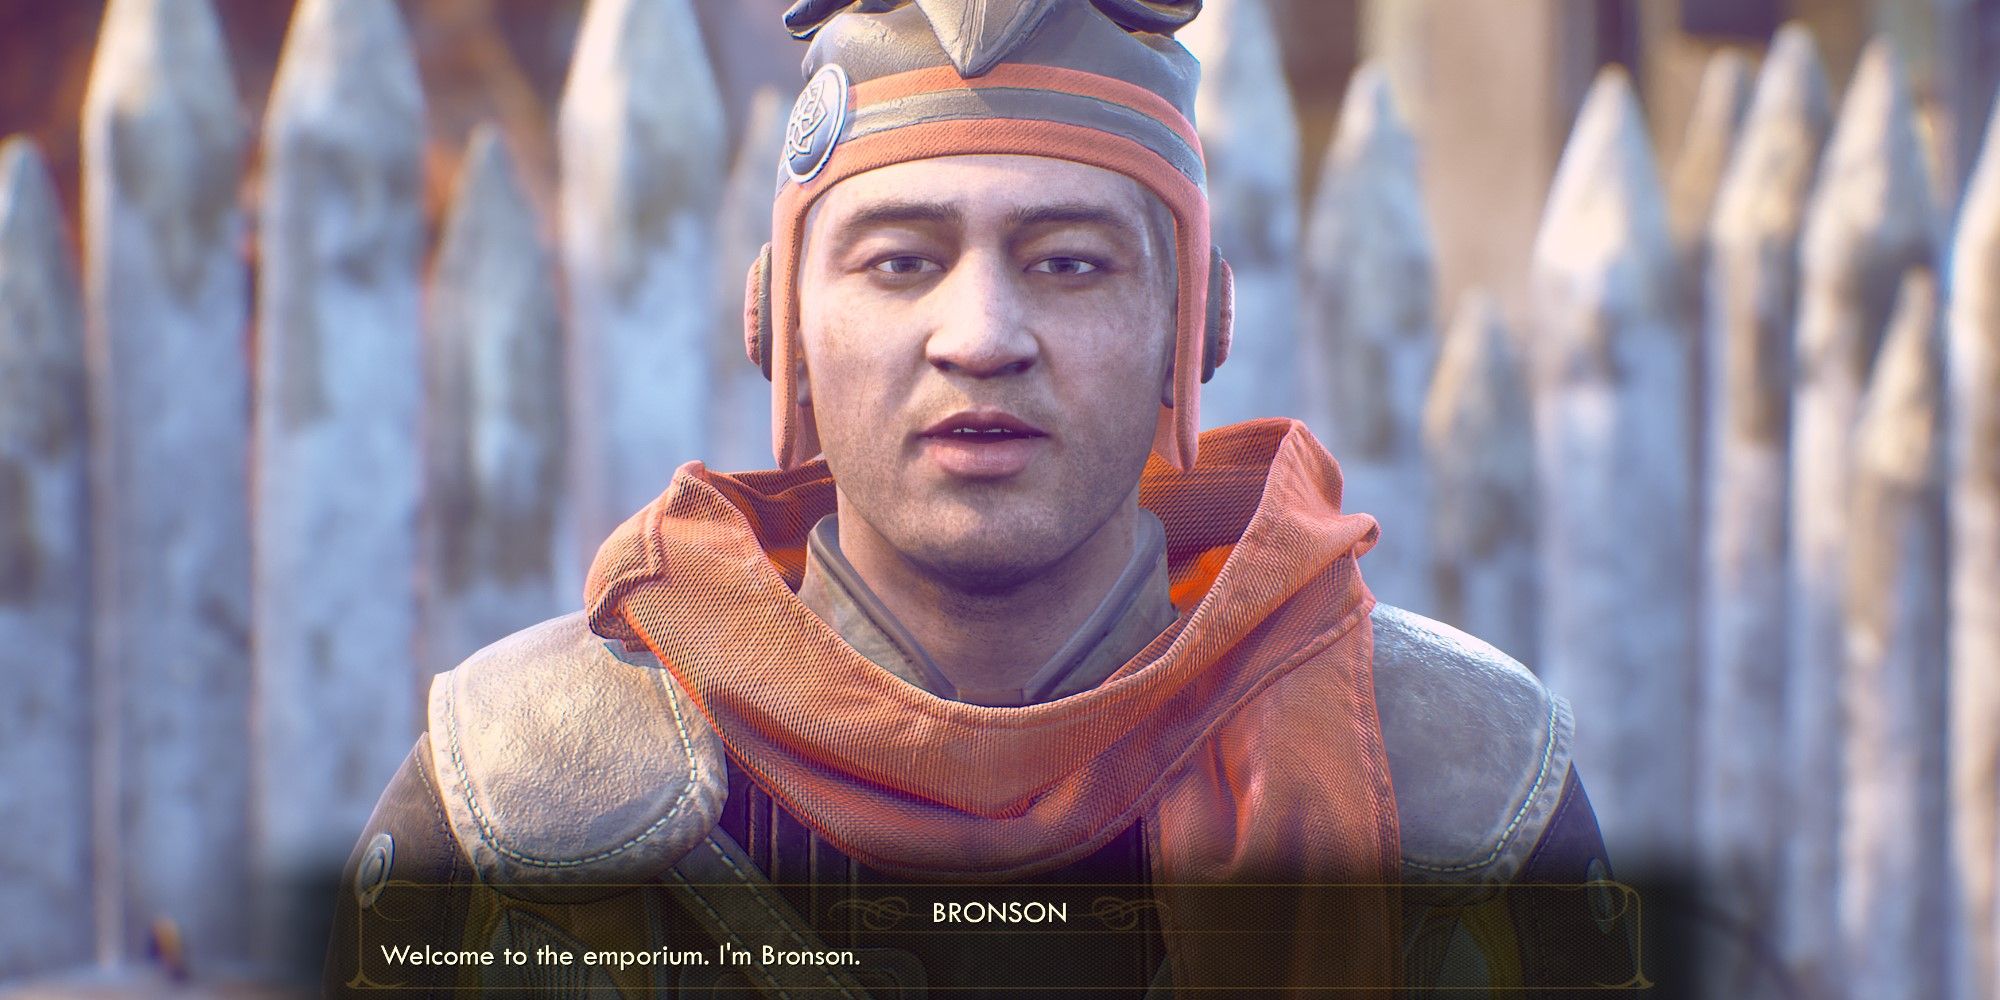 The Outer Worlds Iconoclast Bronson telling the player he is the emporium